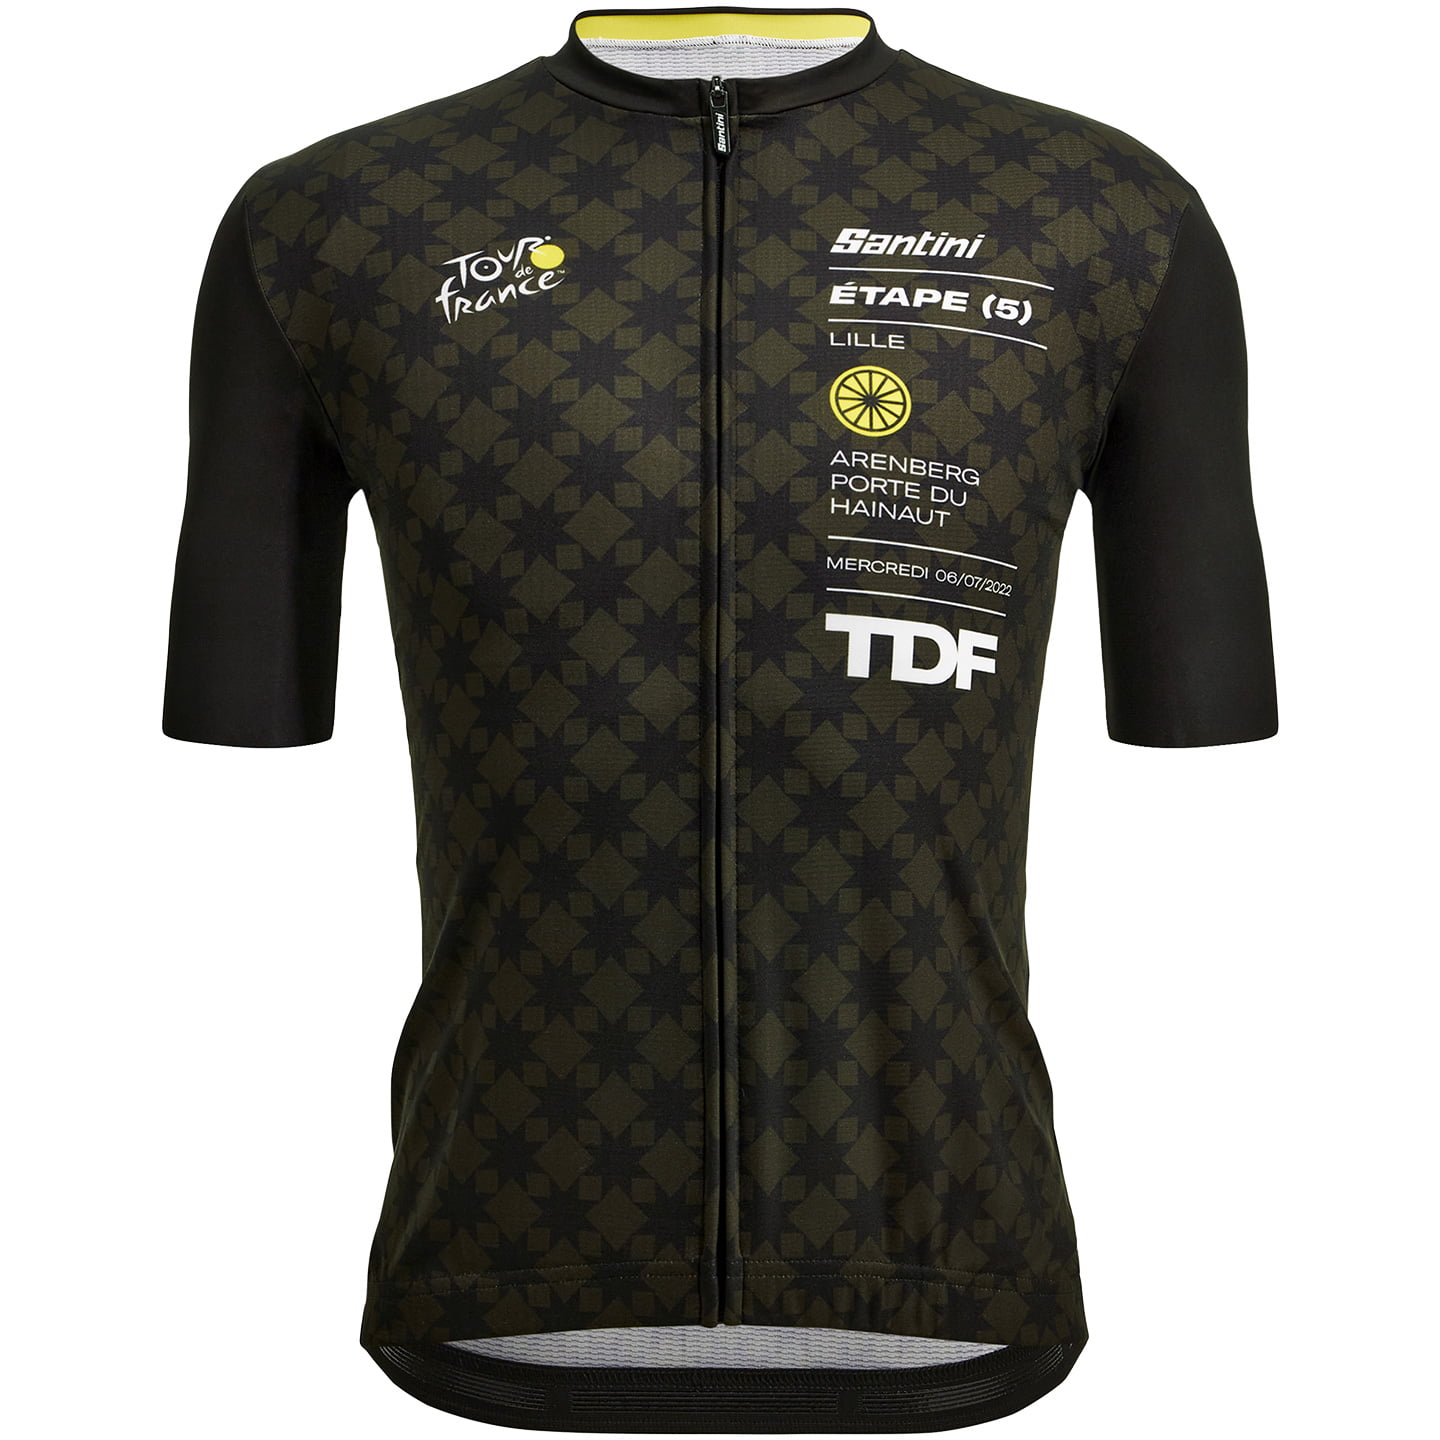 TOUR DE FRANCE Lille-Arenberg 2022 Short Sleeve Jersey, for men, size L, Cycling shirt, Cycle clothing